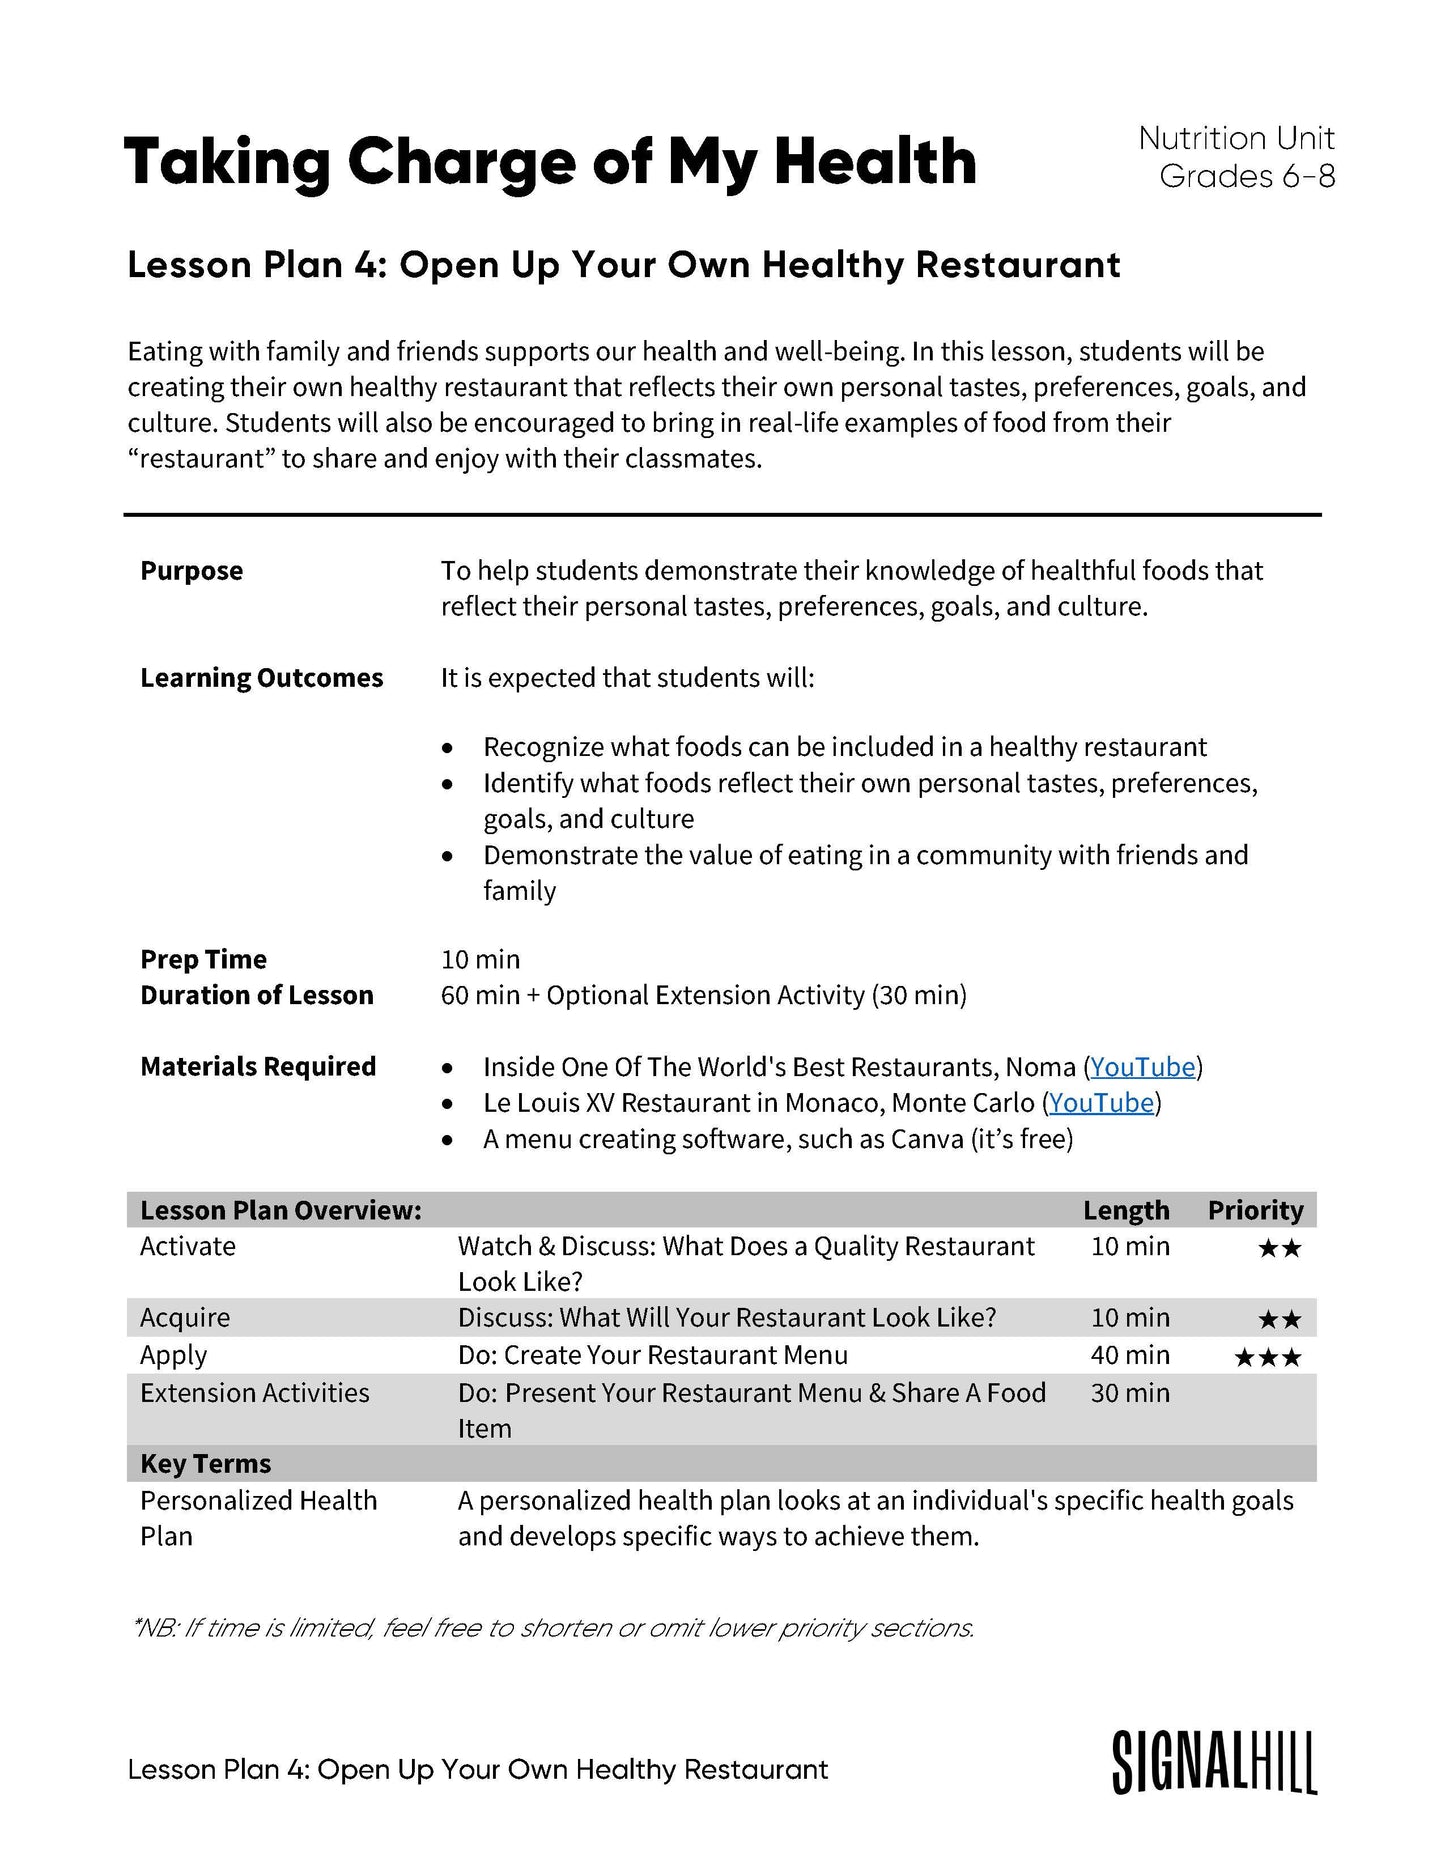 Lesson Plan 4:  Open Up Your Own Healthy Restaurant